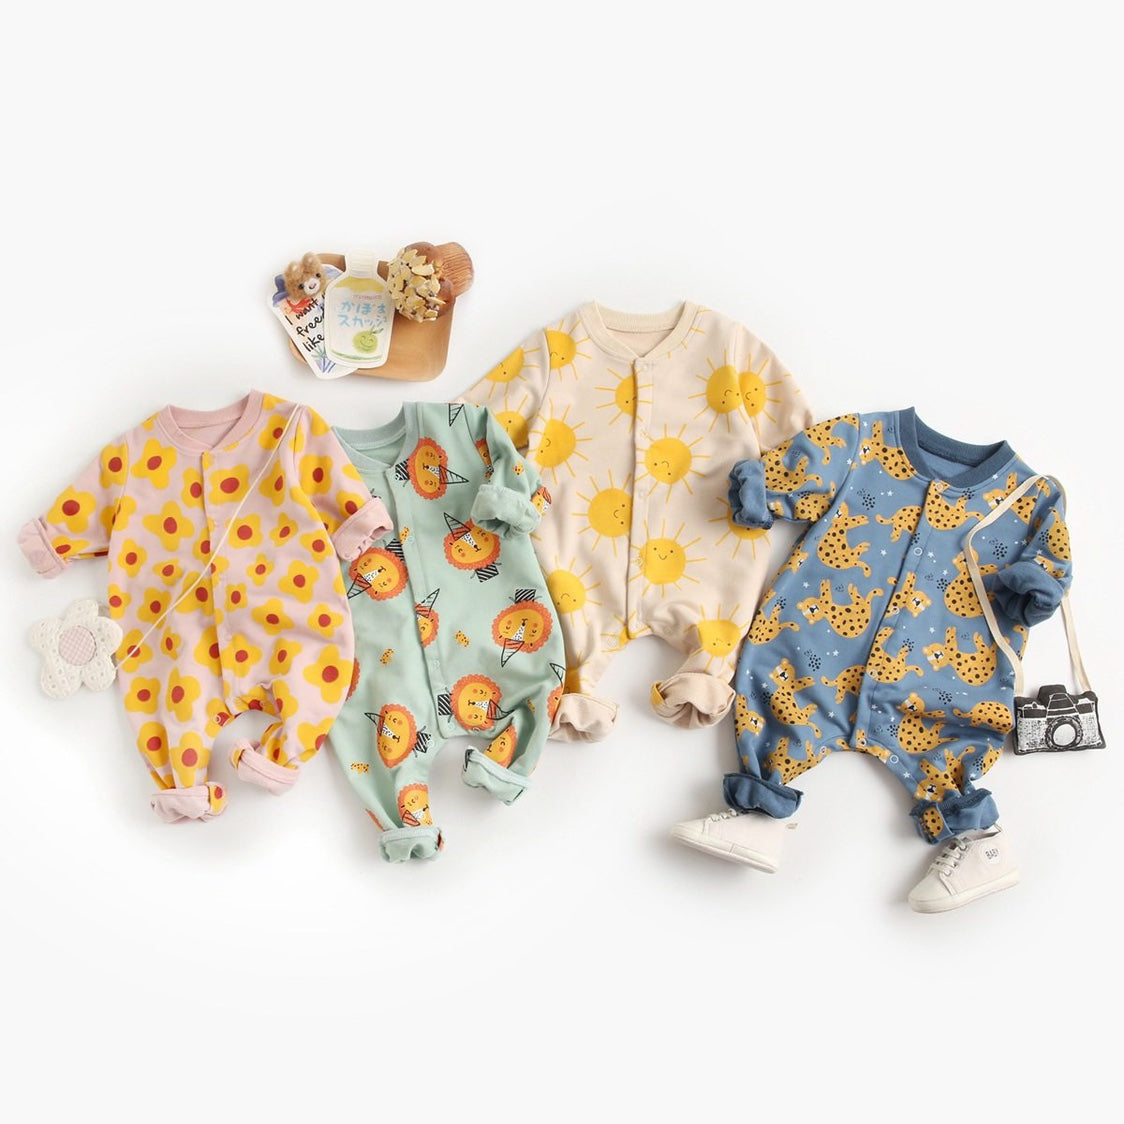 BRIGHT EARTHY BABY Green Lions Cotton Long-Sleeve Romper